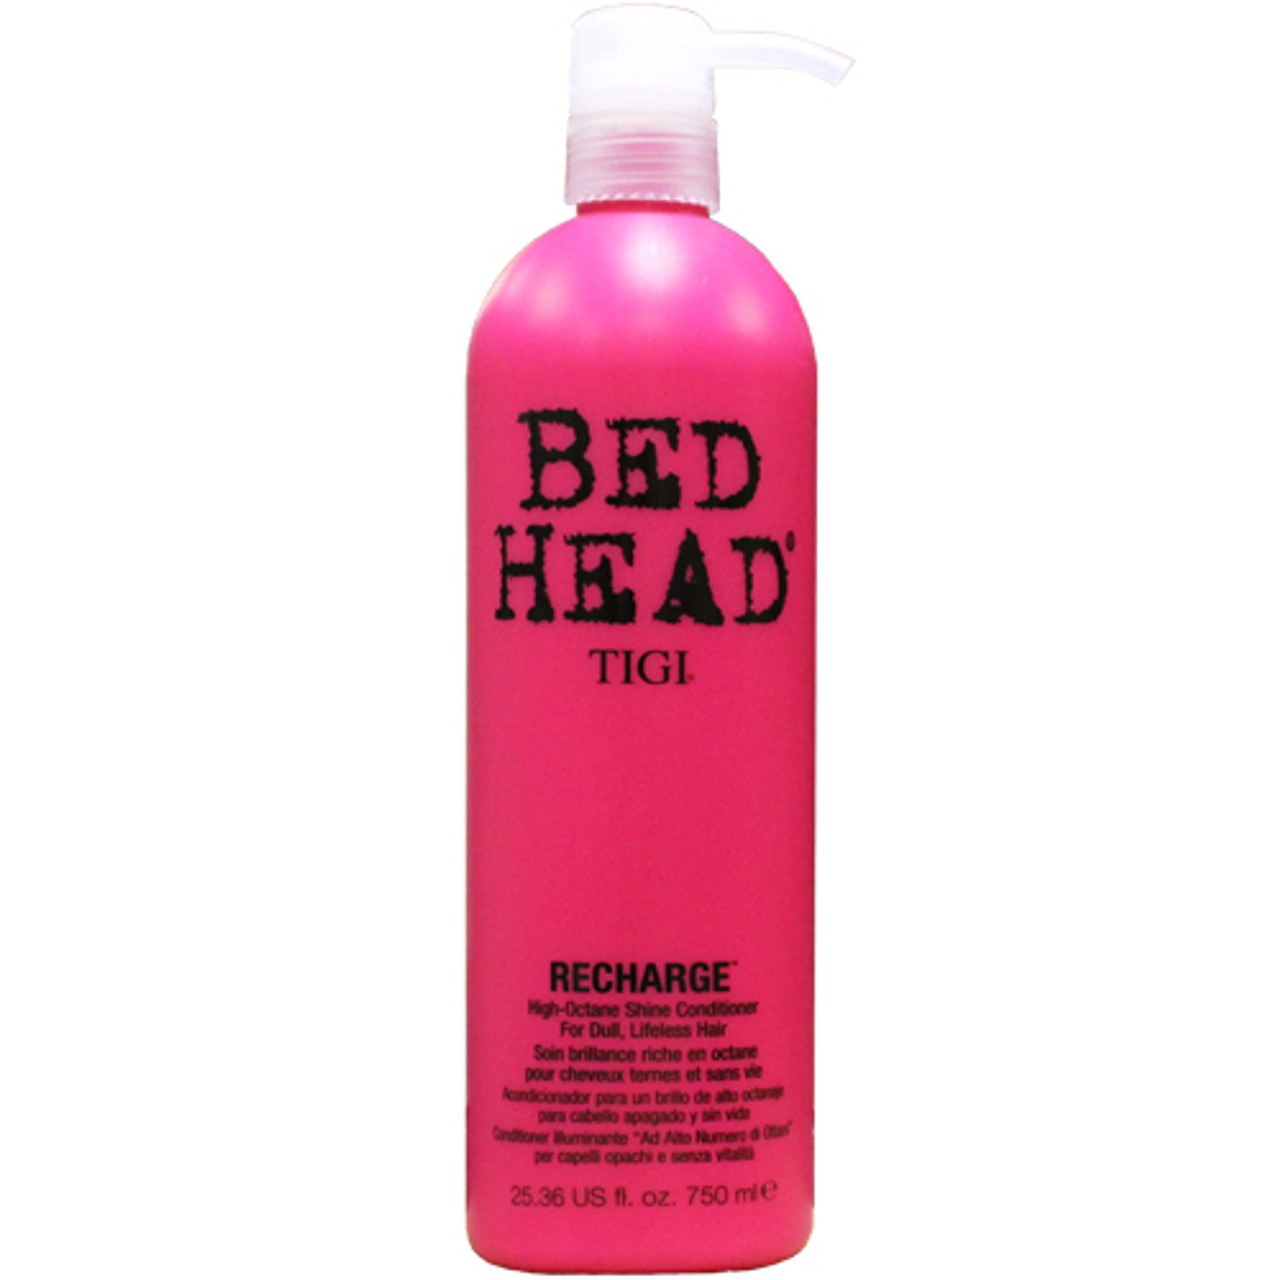 https://cdn11.bigcommerce.com/s-mh2j93cgqj/images/stencil/1280x1280/products/34638/17662/bed-head-recharge-conditioner-25-oz__37333.1487291641.jpg?c=2